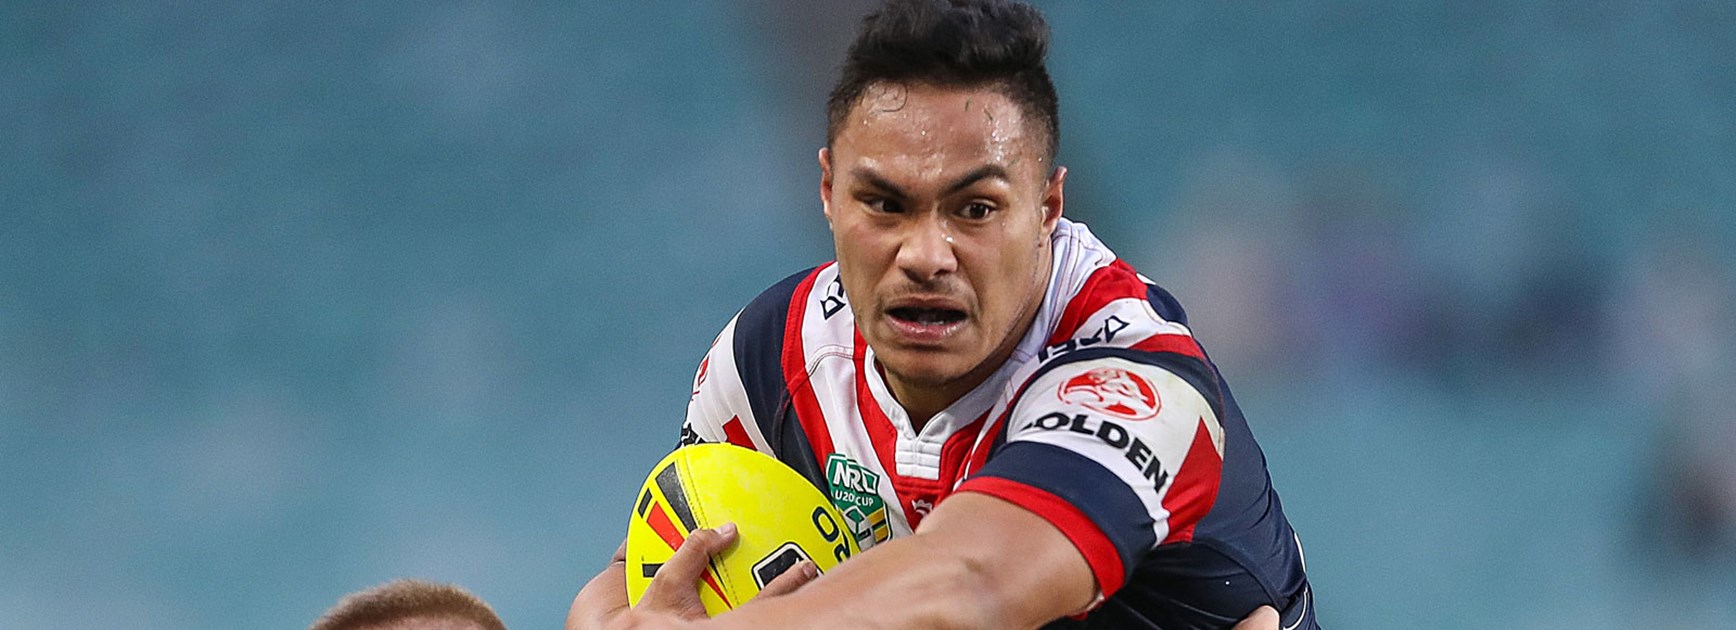 Johnny Tuivasa-Sheck scored a memorable try for the NYC Roosters in their preliminary final win.